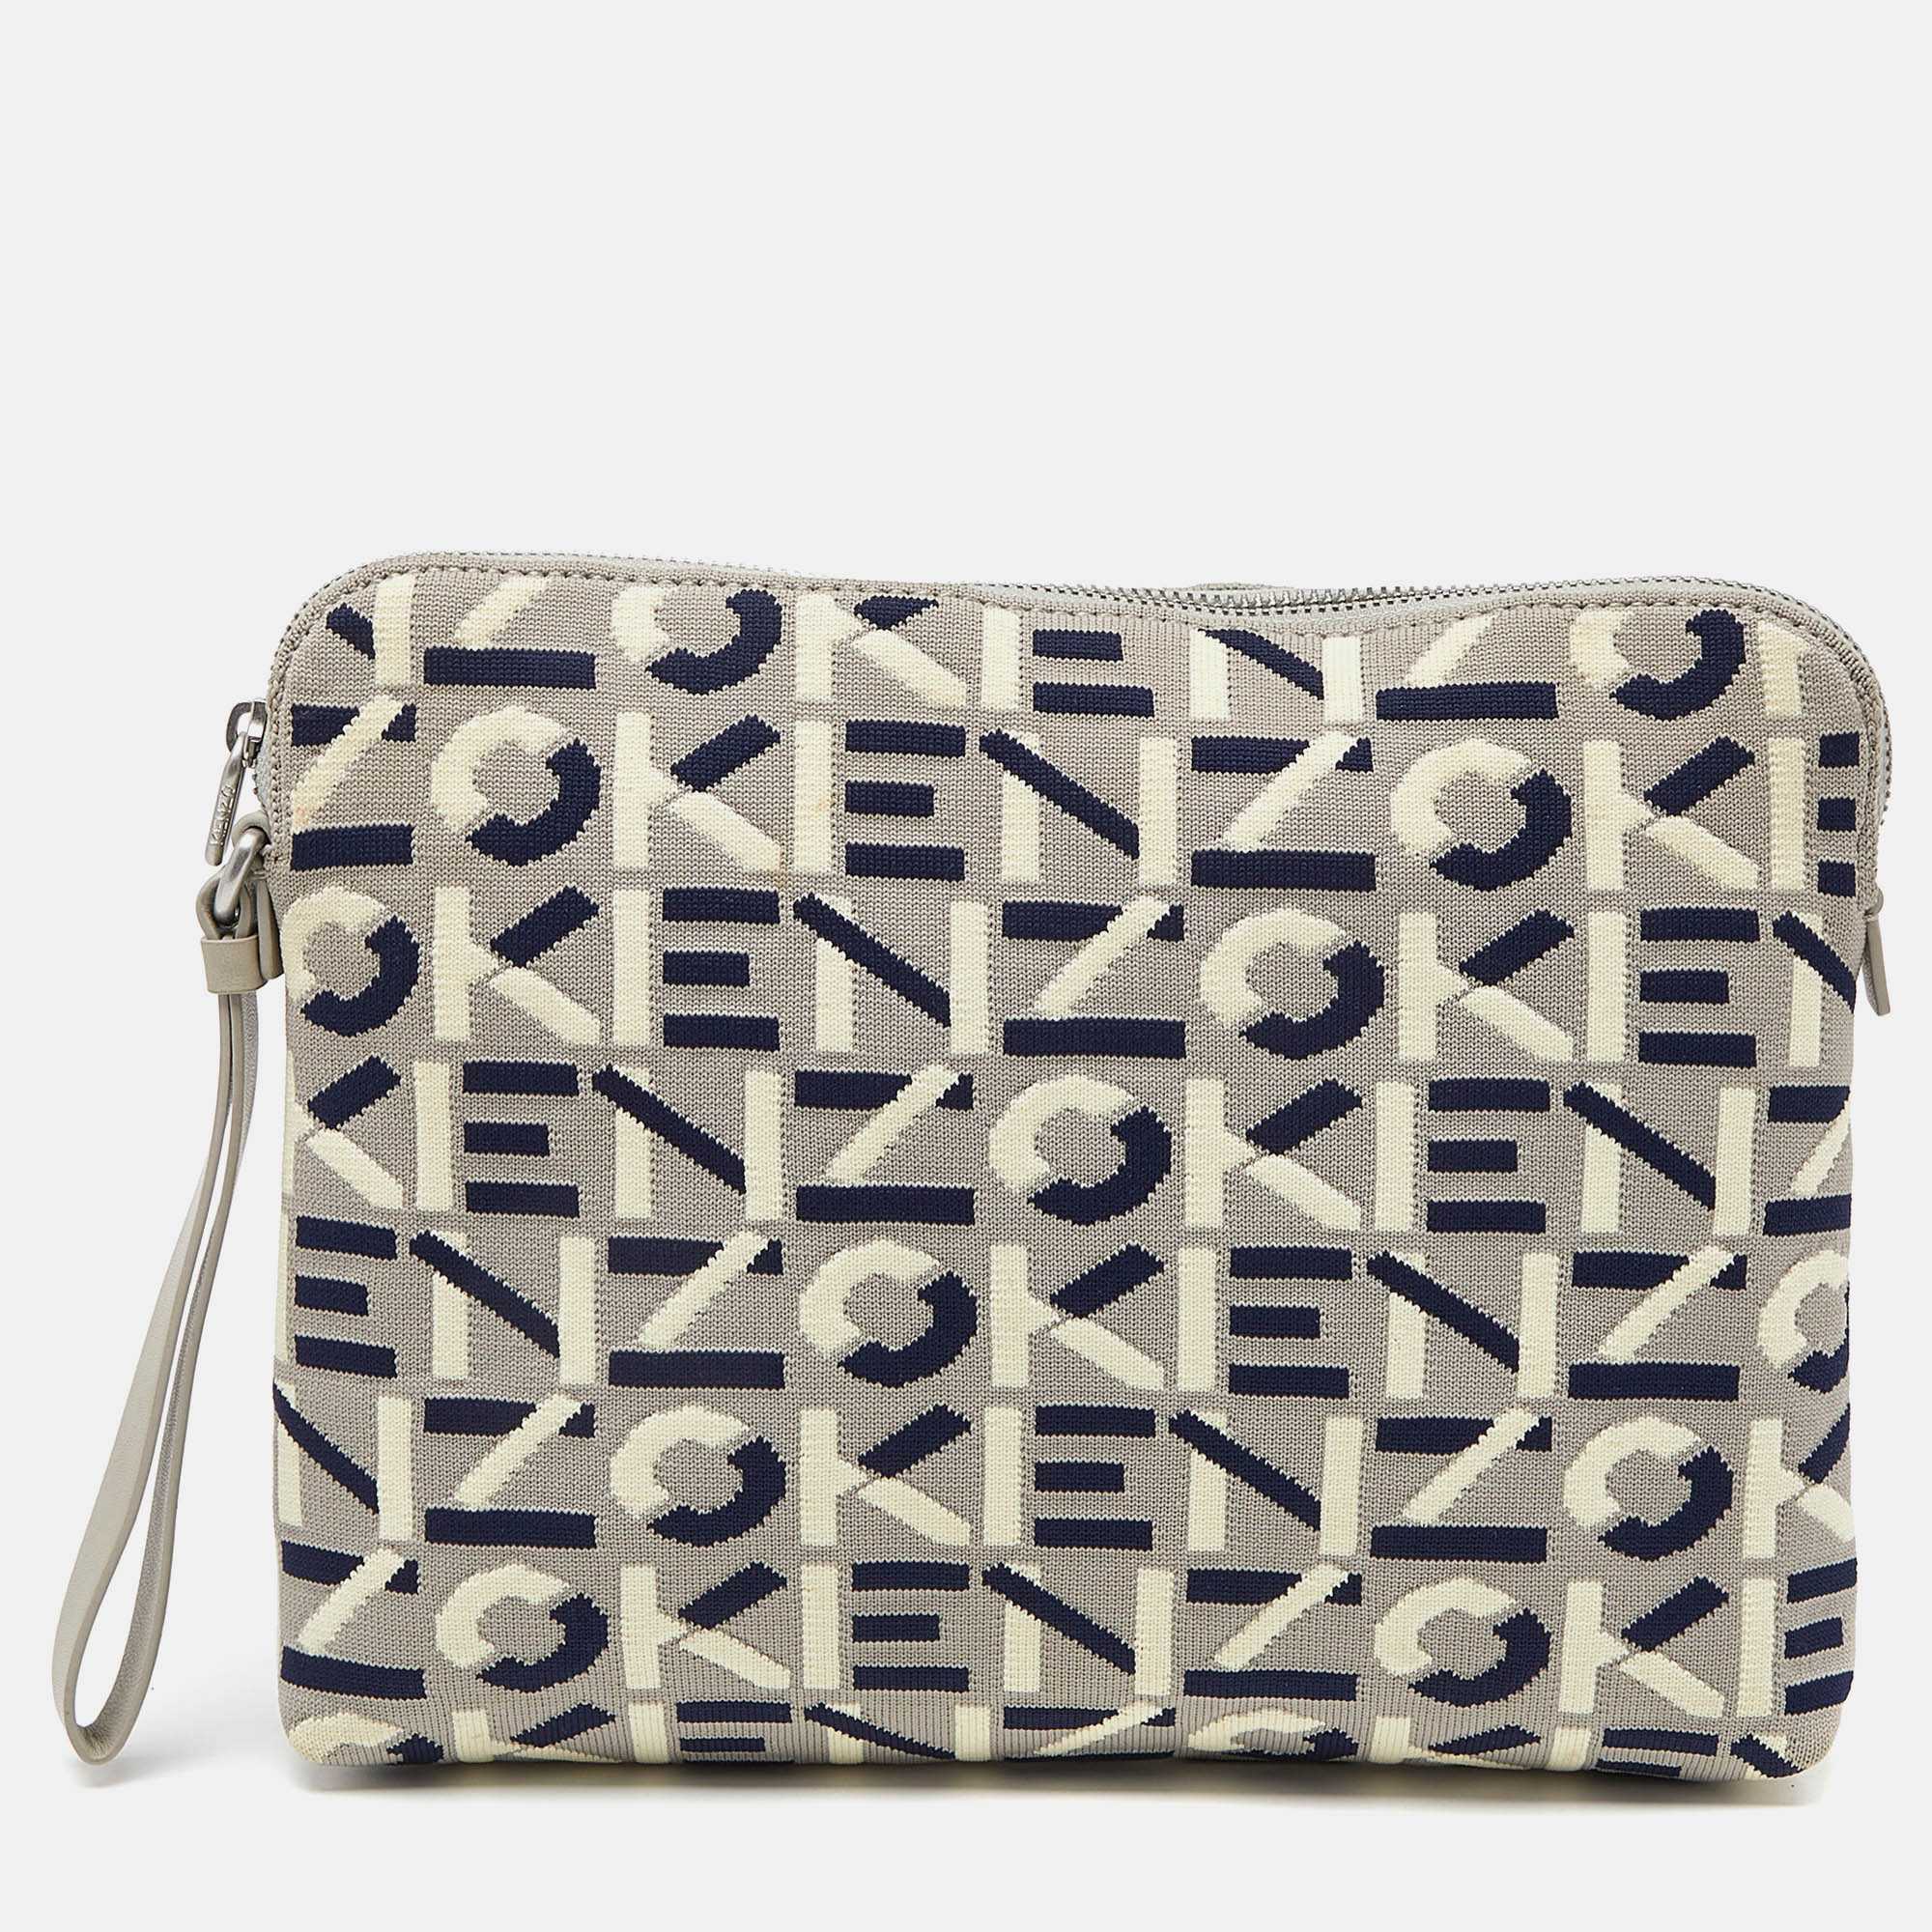 Tri Color Printed Logo Knit Fabric Zipped Wristlet Pouch